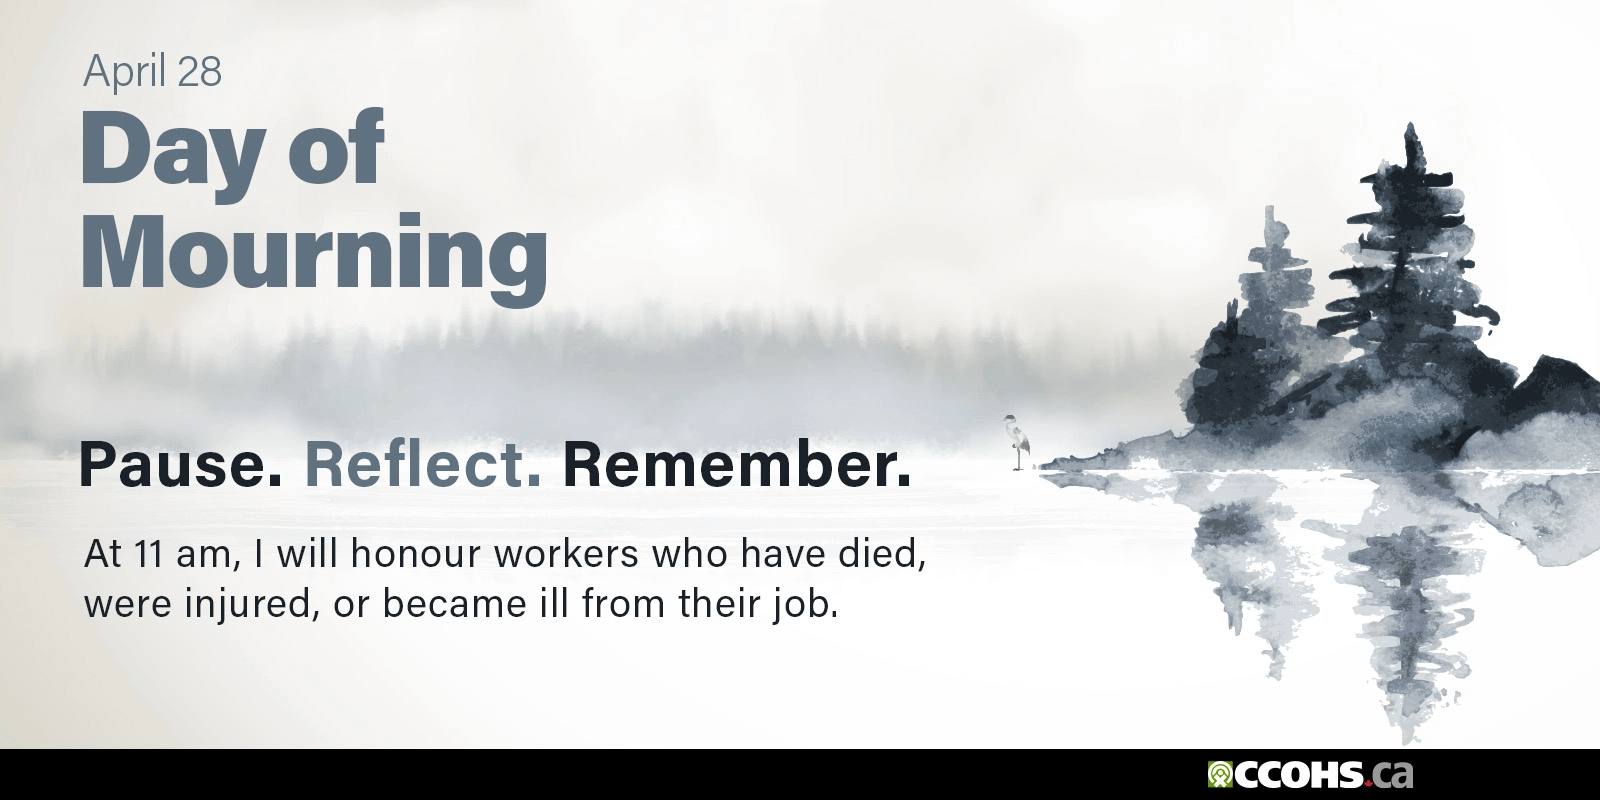 National Day of Mourning. At 11 a.m., I will honour workers who have died, were injured, or became ill from their job. Pause. Reflect. Remember.